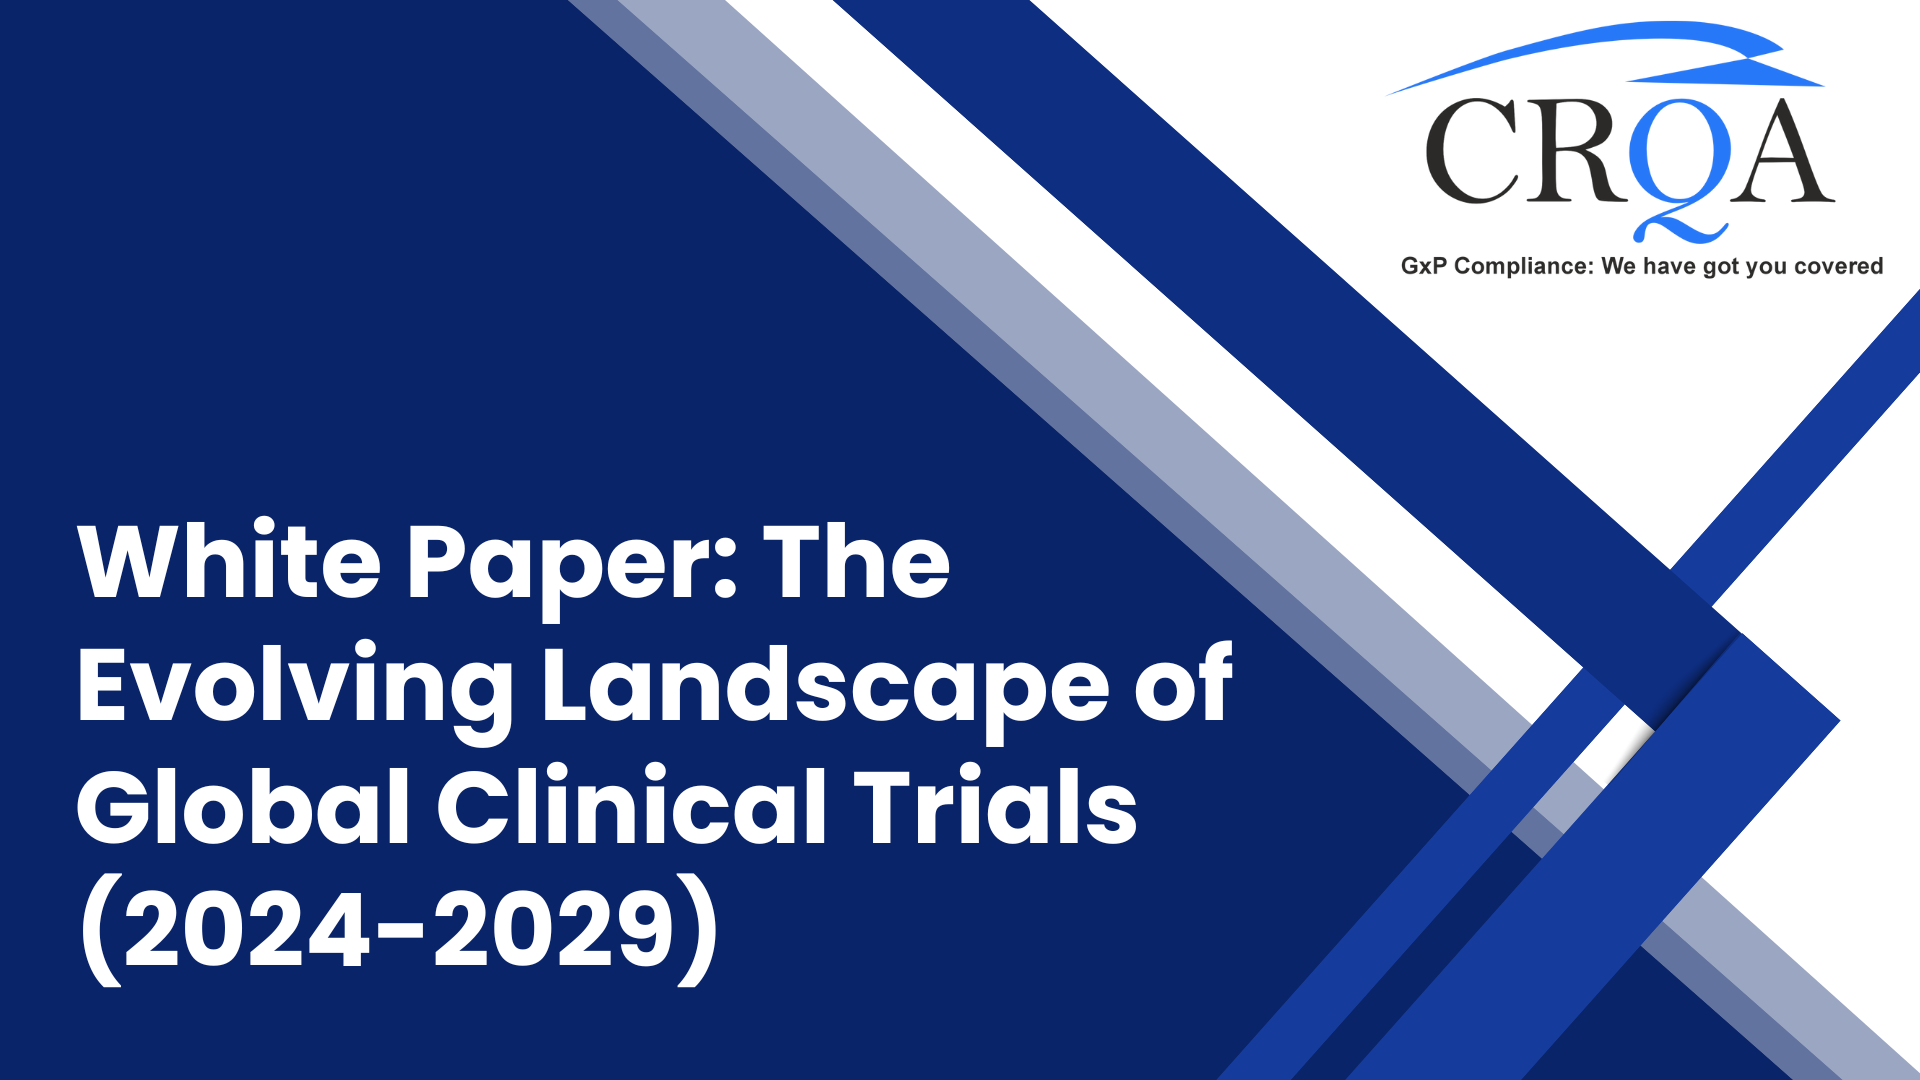 White Paper: The Evolving Landscape of Global Clinical Trials (2024-2029)